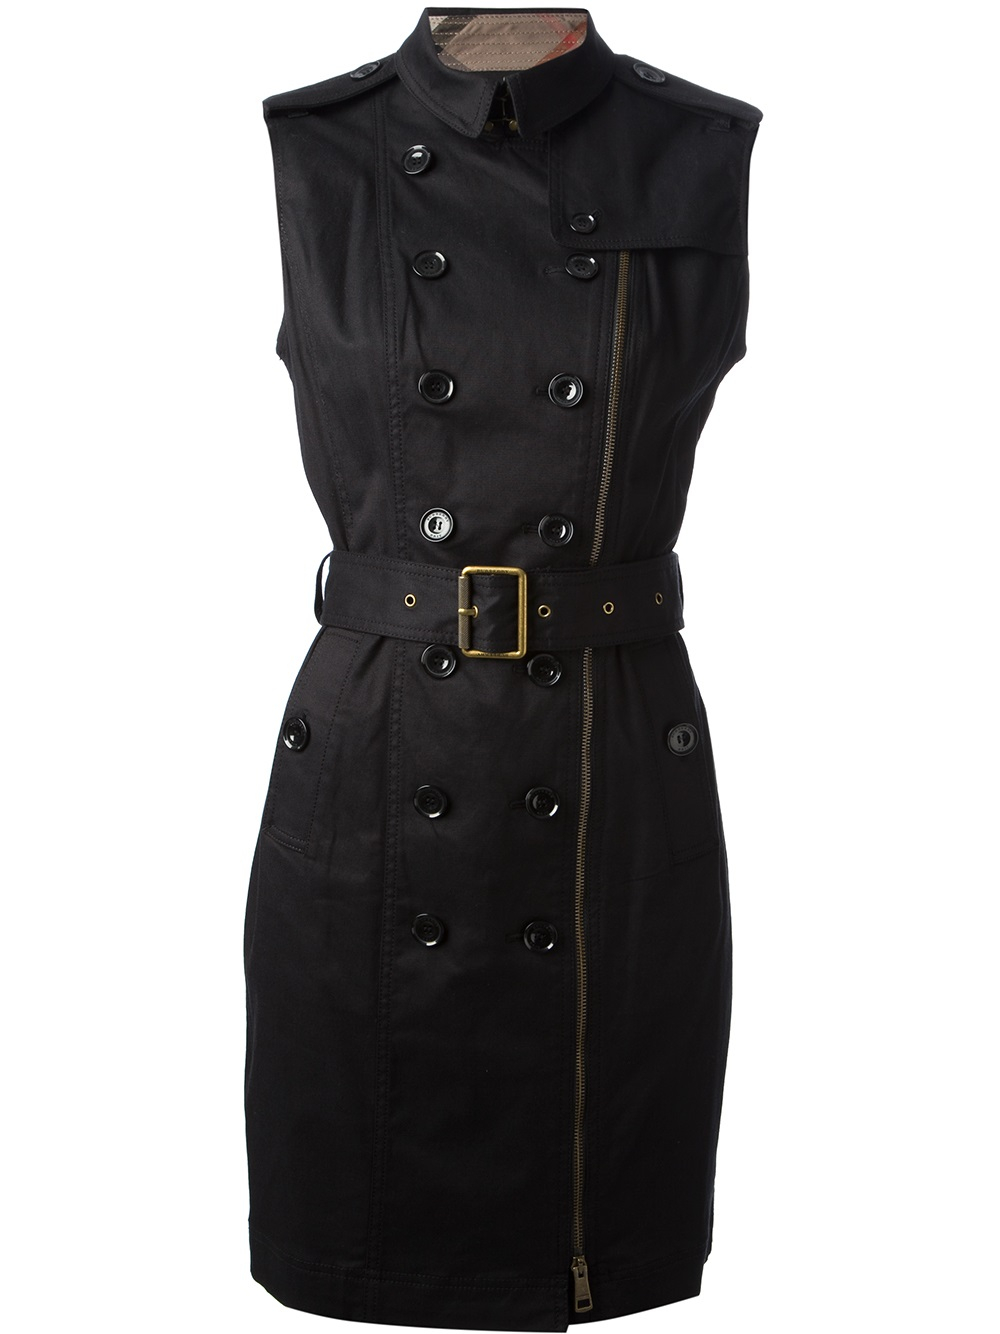 Burberry Brit Belted Trench Dress in Black | Lyst